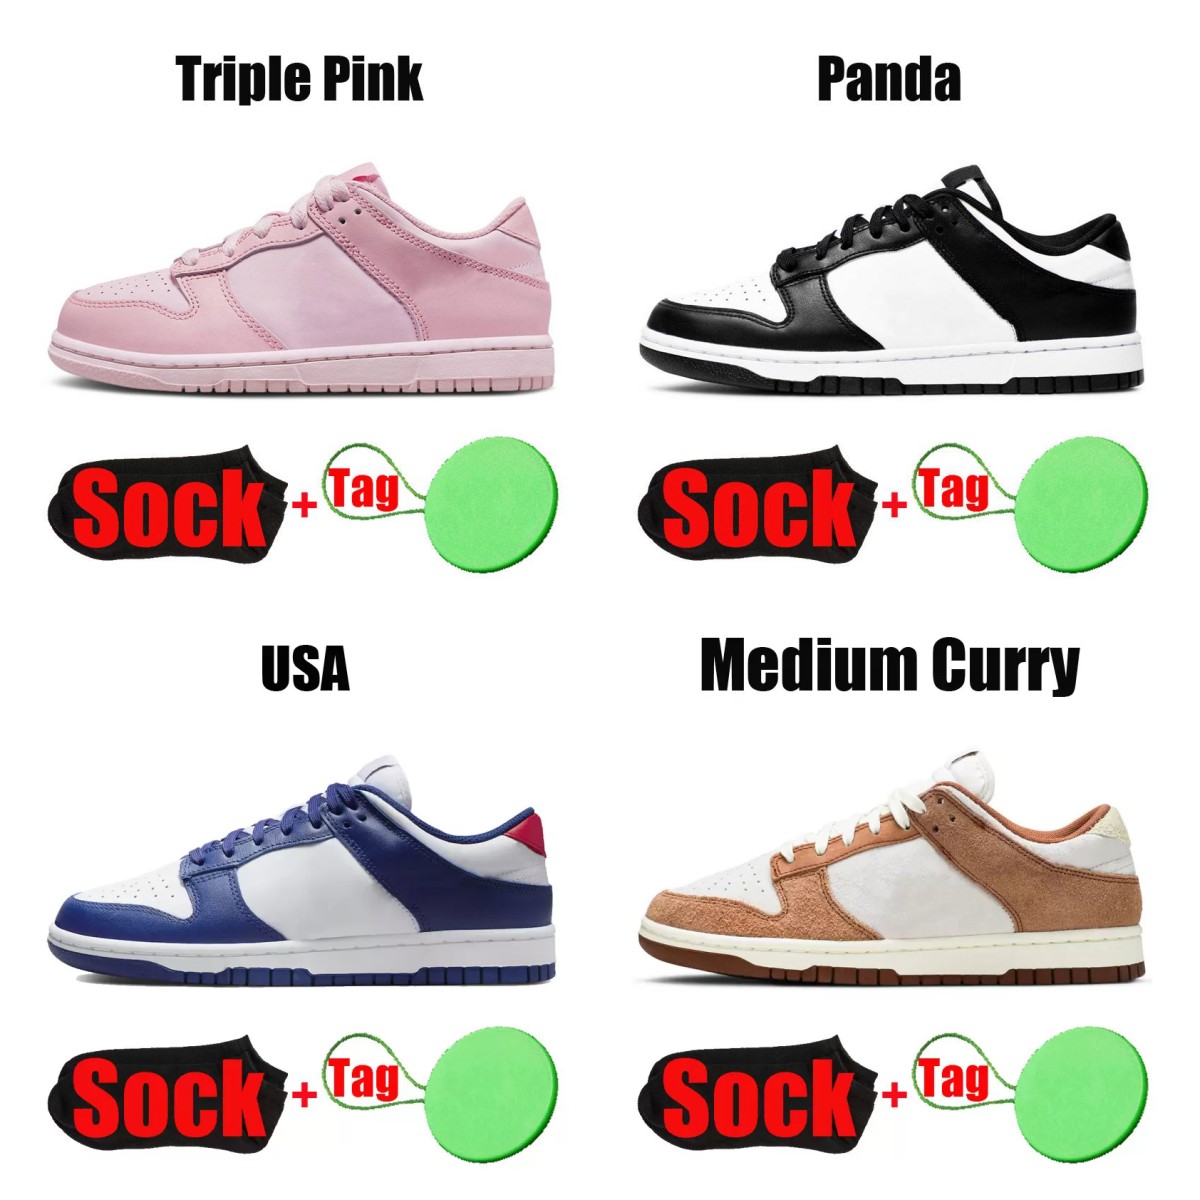 

Panda running shoes for mens womens UNC University sb Racer Blue Triple Pink dunks lows Grey Fog dunkes Coast Syracuse dunked trainers sports sneakers, #49 medium curry 36-45